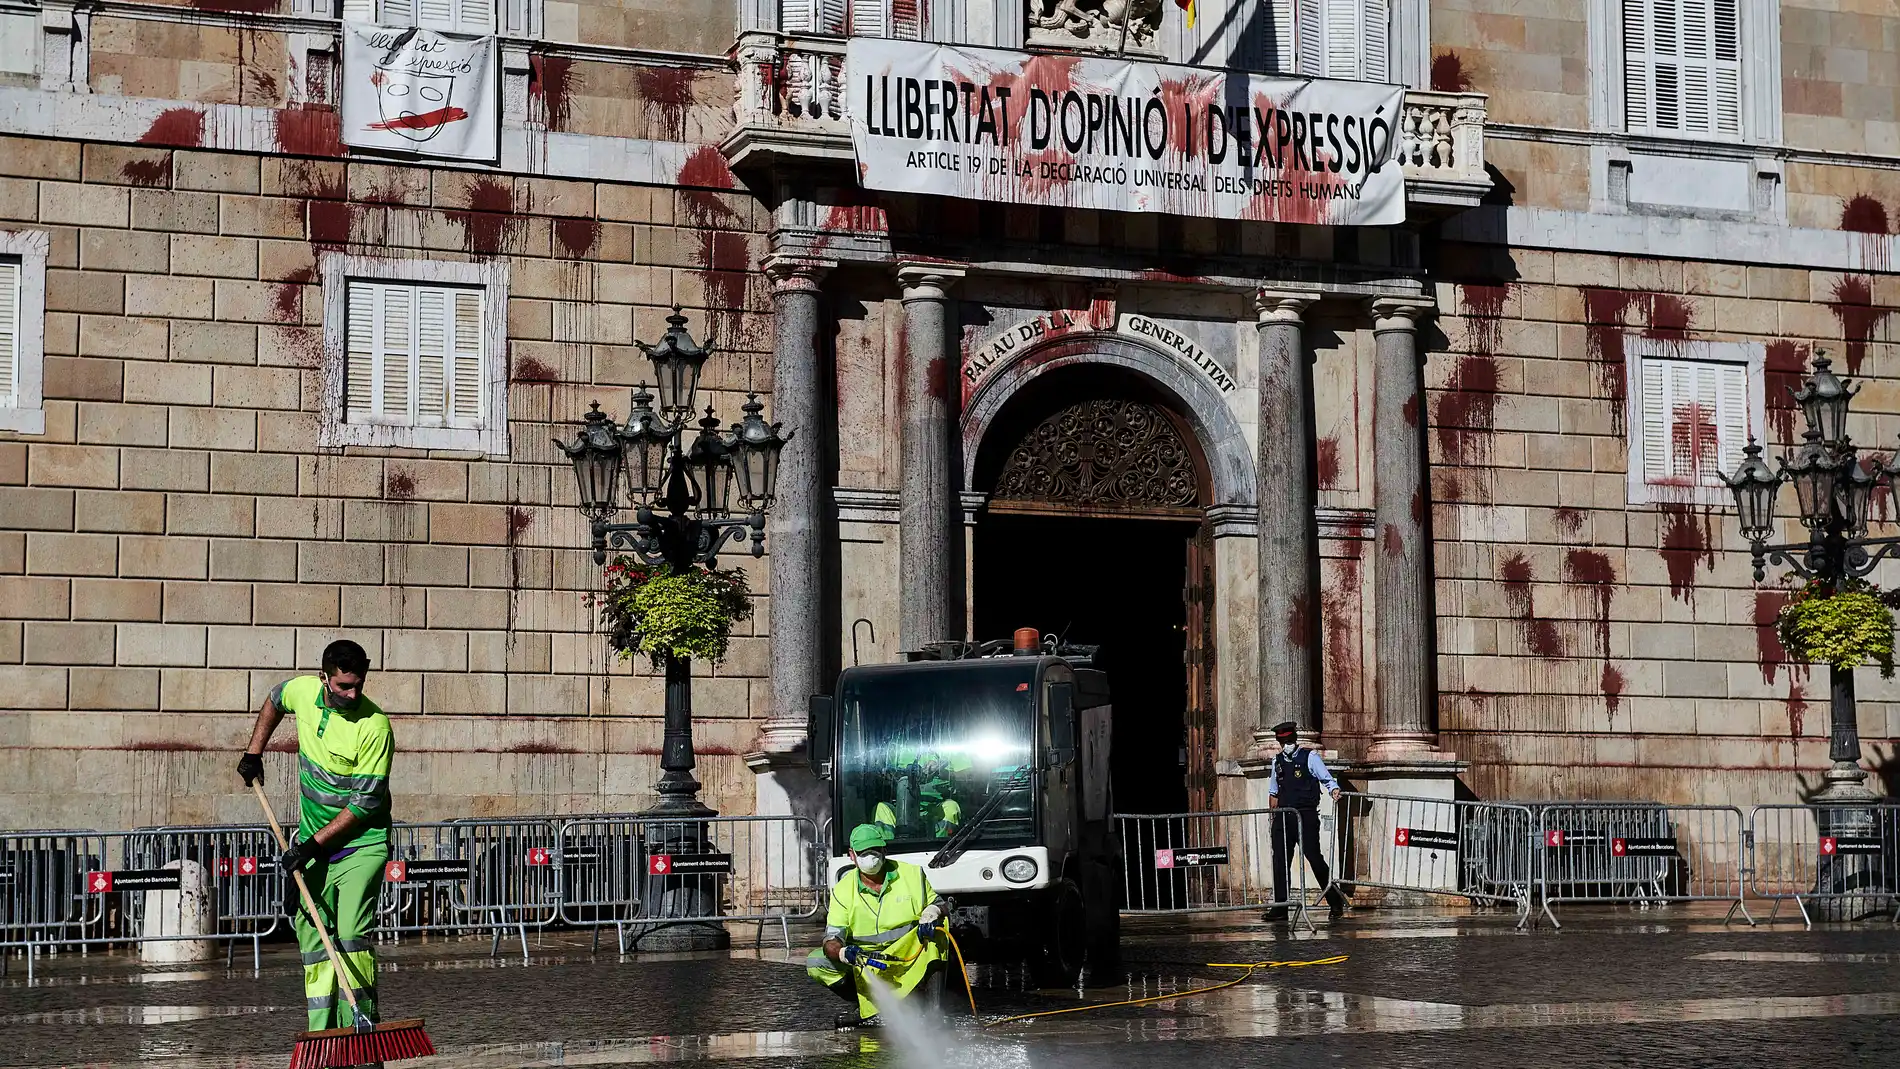 08 November 2020, Spain, Barcelona: Cleaning workers of the city of Barcelona clean outside the Catalonia Government building after a group of seven people has thrown balloons with red paint on the facade of the Palau de la Generalitat during a protest against in the damage in the hospitality sector after restrictions imposed by the government. Photo: Miguel Lopez Mallch/DAX via ZUMA Wire/dpaMiguel Lopez Mallch/DAX via ZUMA / DPA08/11/2020 ONLY FOR USE IN SPAIN